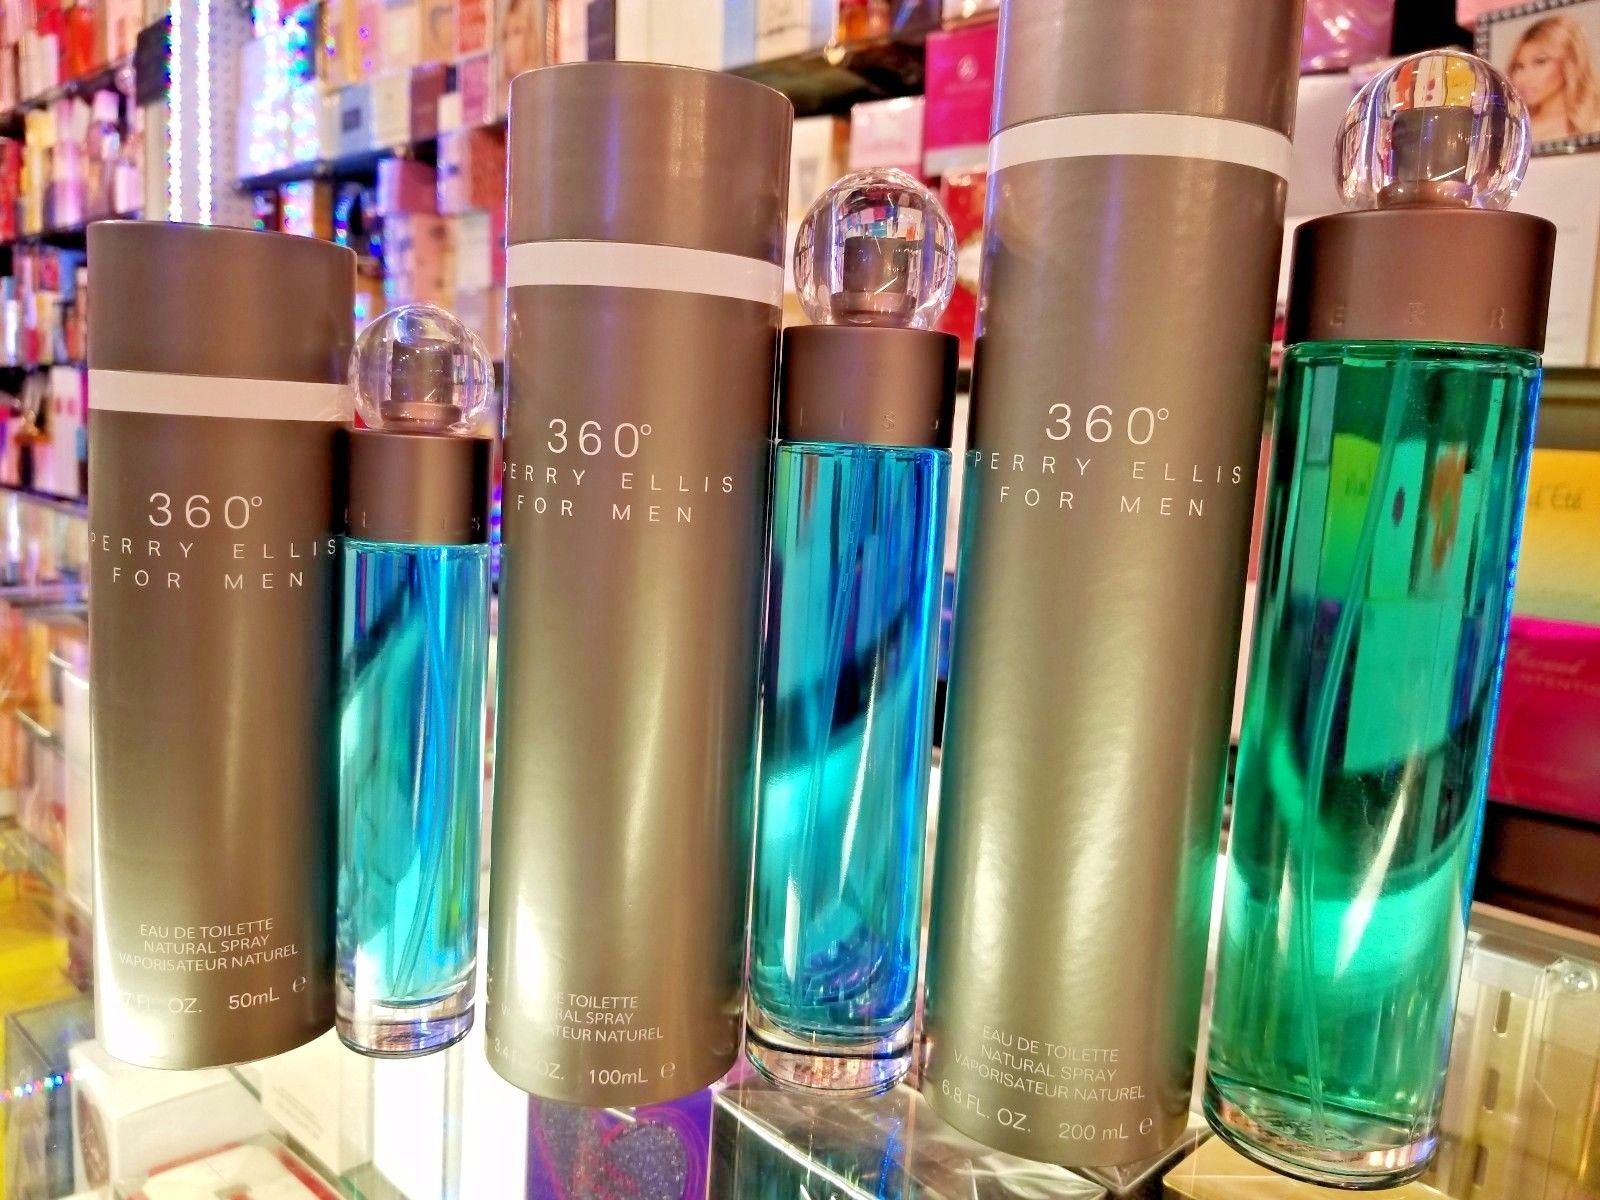 360° for Men by Perry Ellis 1.7 oz / 3.4 oz / 6.8 oz EDT Spray for Men * NEW CAN - $43.99 - $60.49